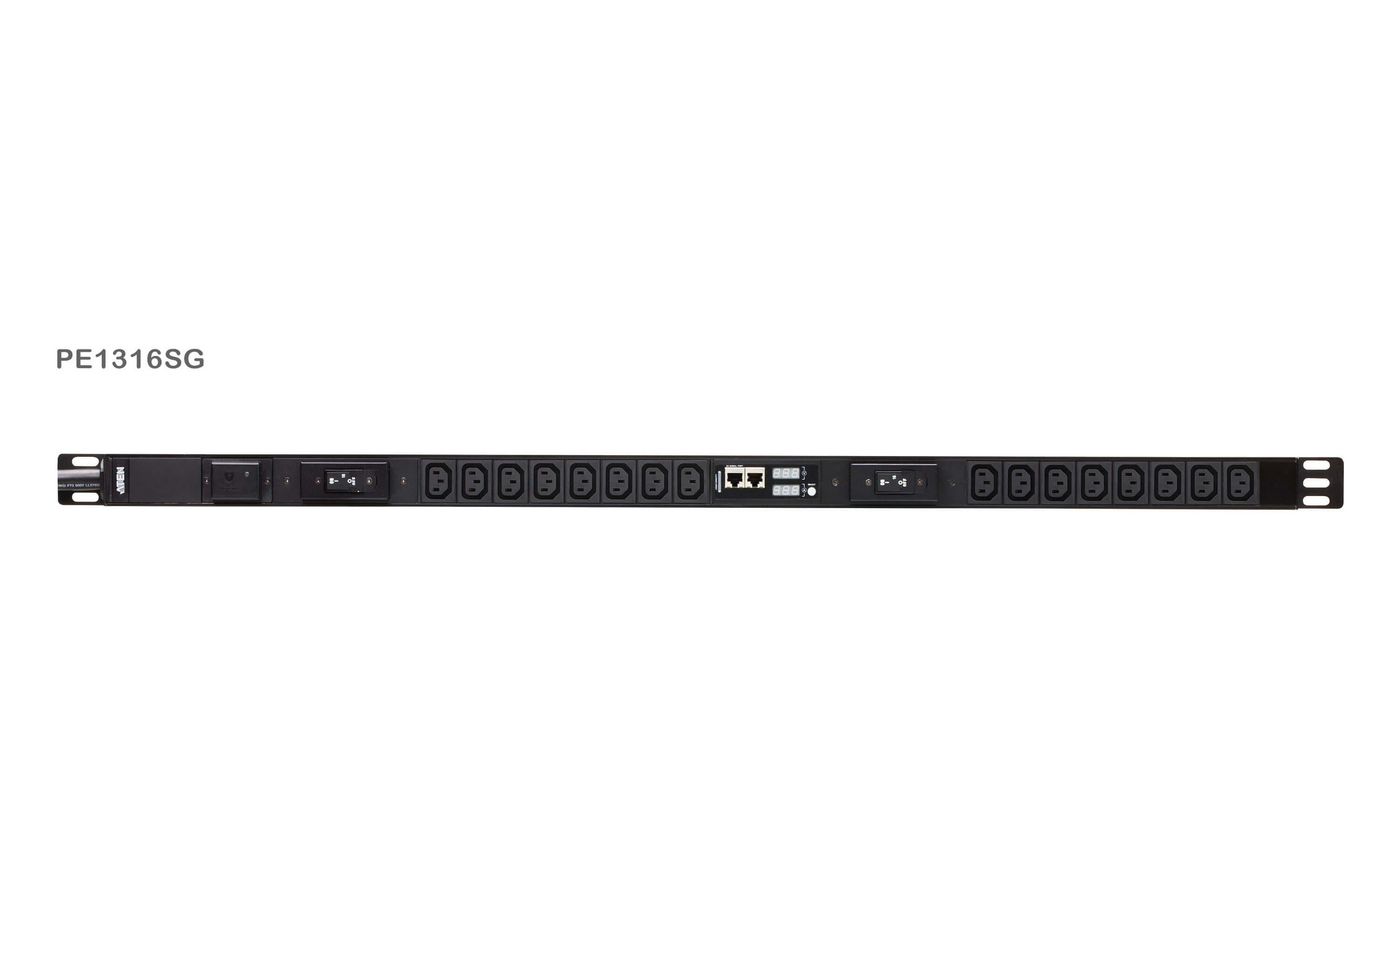 16-outlet 0u Pdu With Current & VoltageLCD Display Overcurrent And Surge Protection (32a) (16x C13)